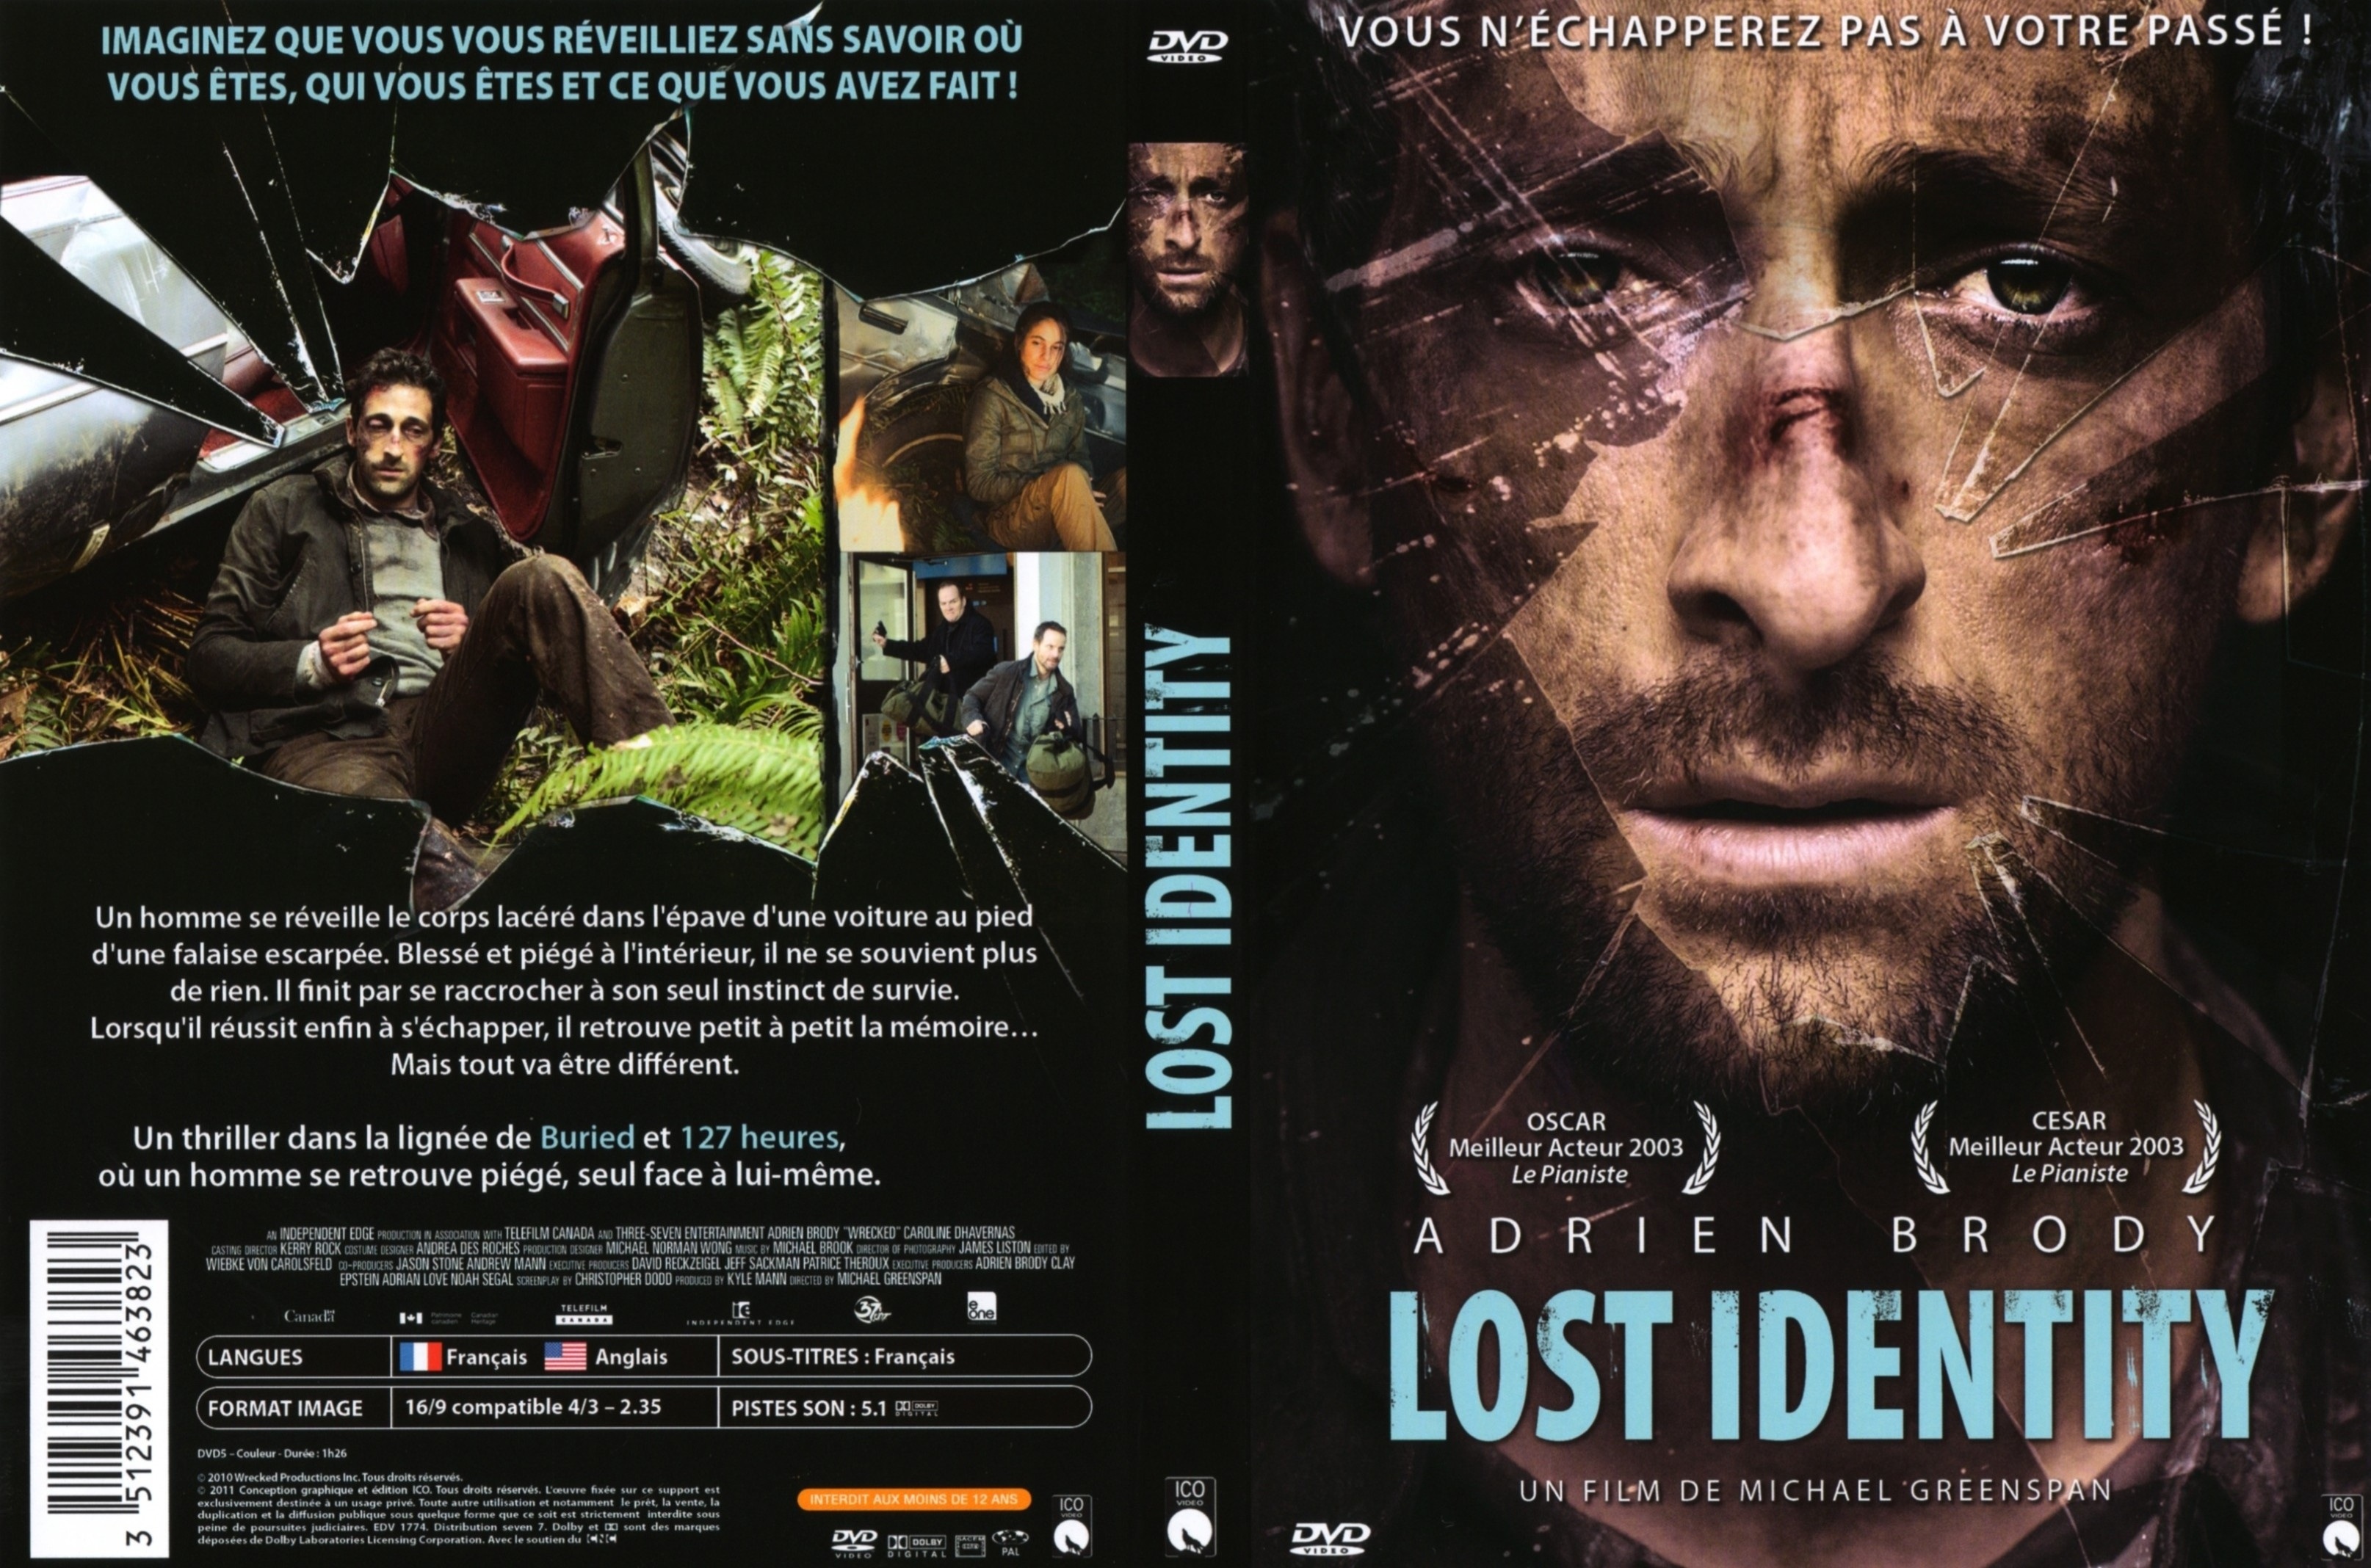 Jaquette DVD Lost identity